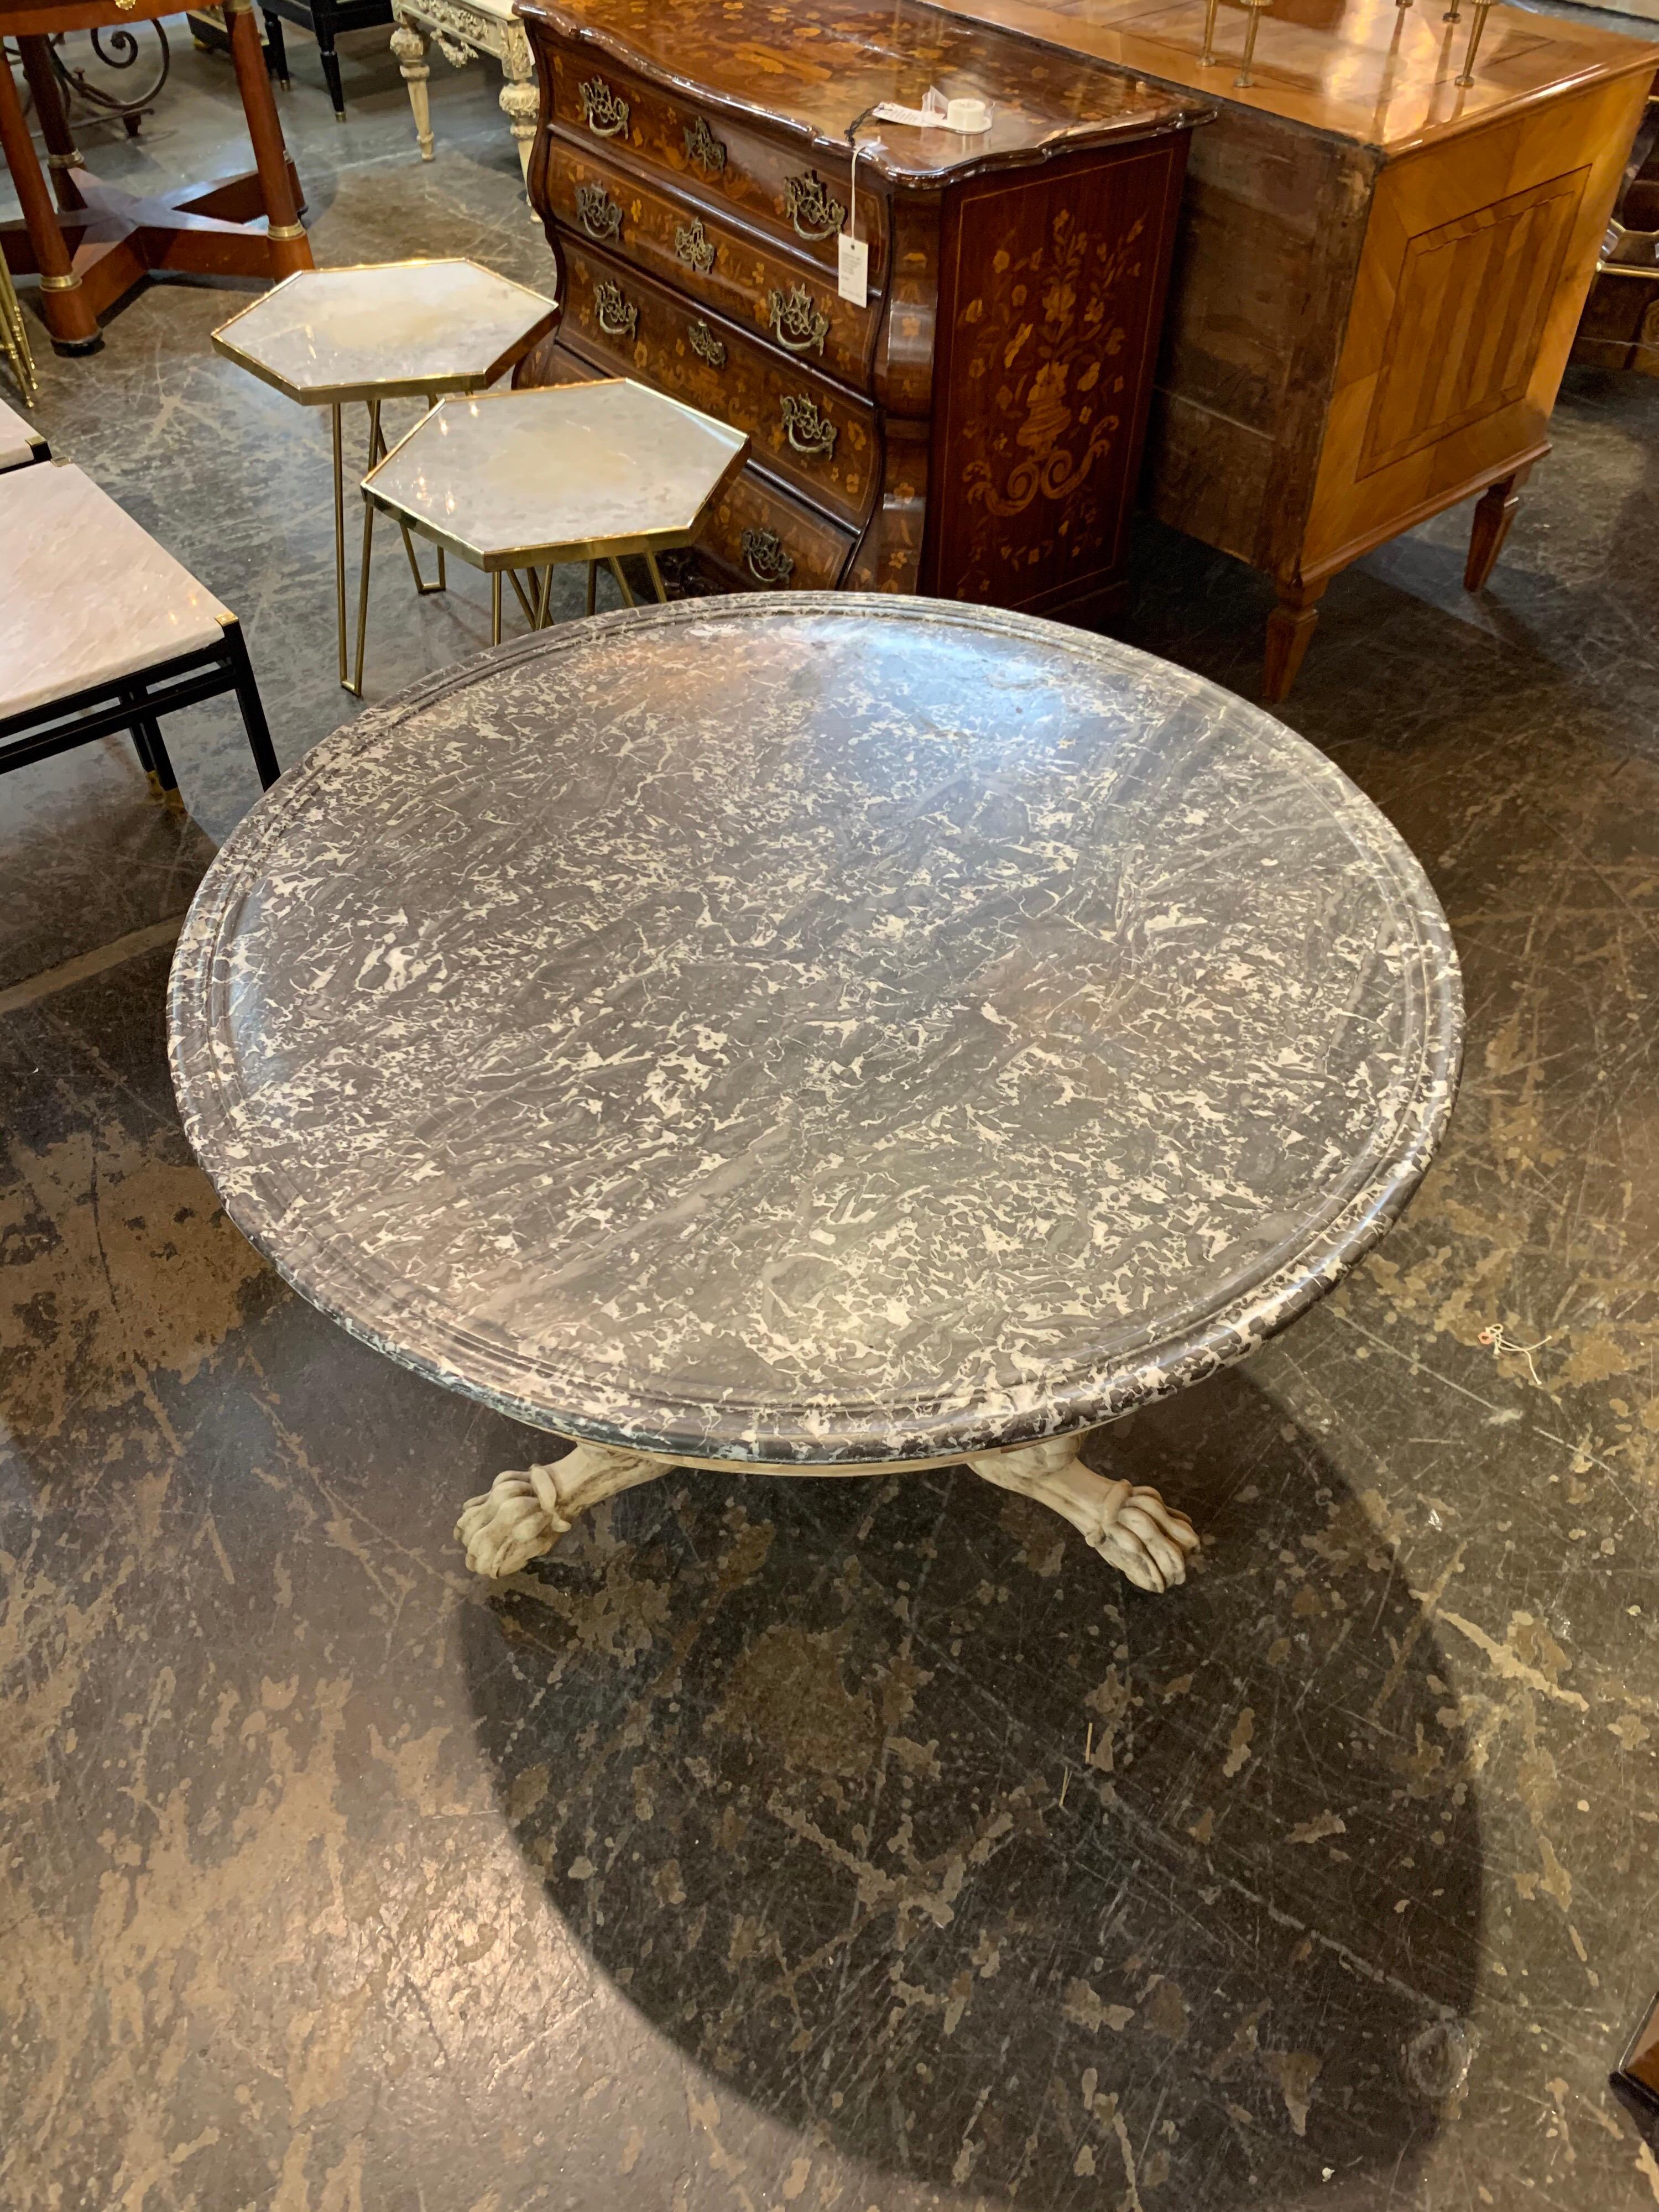 Amazing 19th century French Charles X table with a gorgeous marble top. The base is beautifully carved and has a fine bleached patina. This stunning piece would definitely create a beautiful focal point.